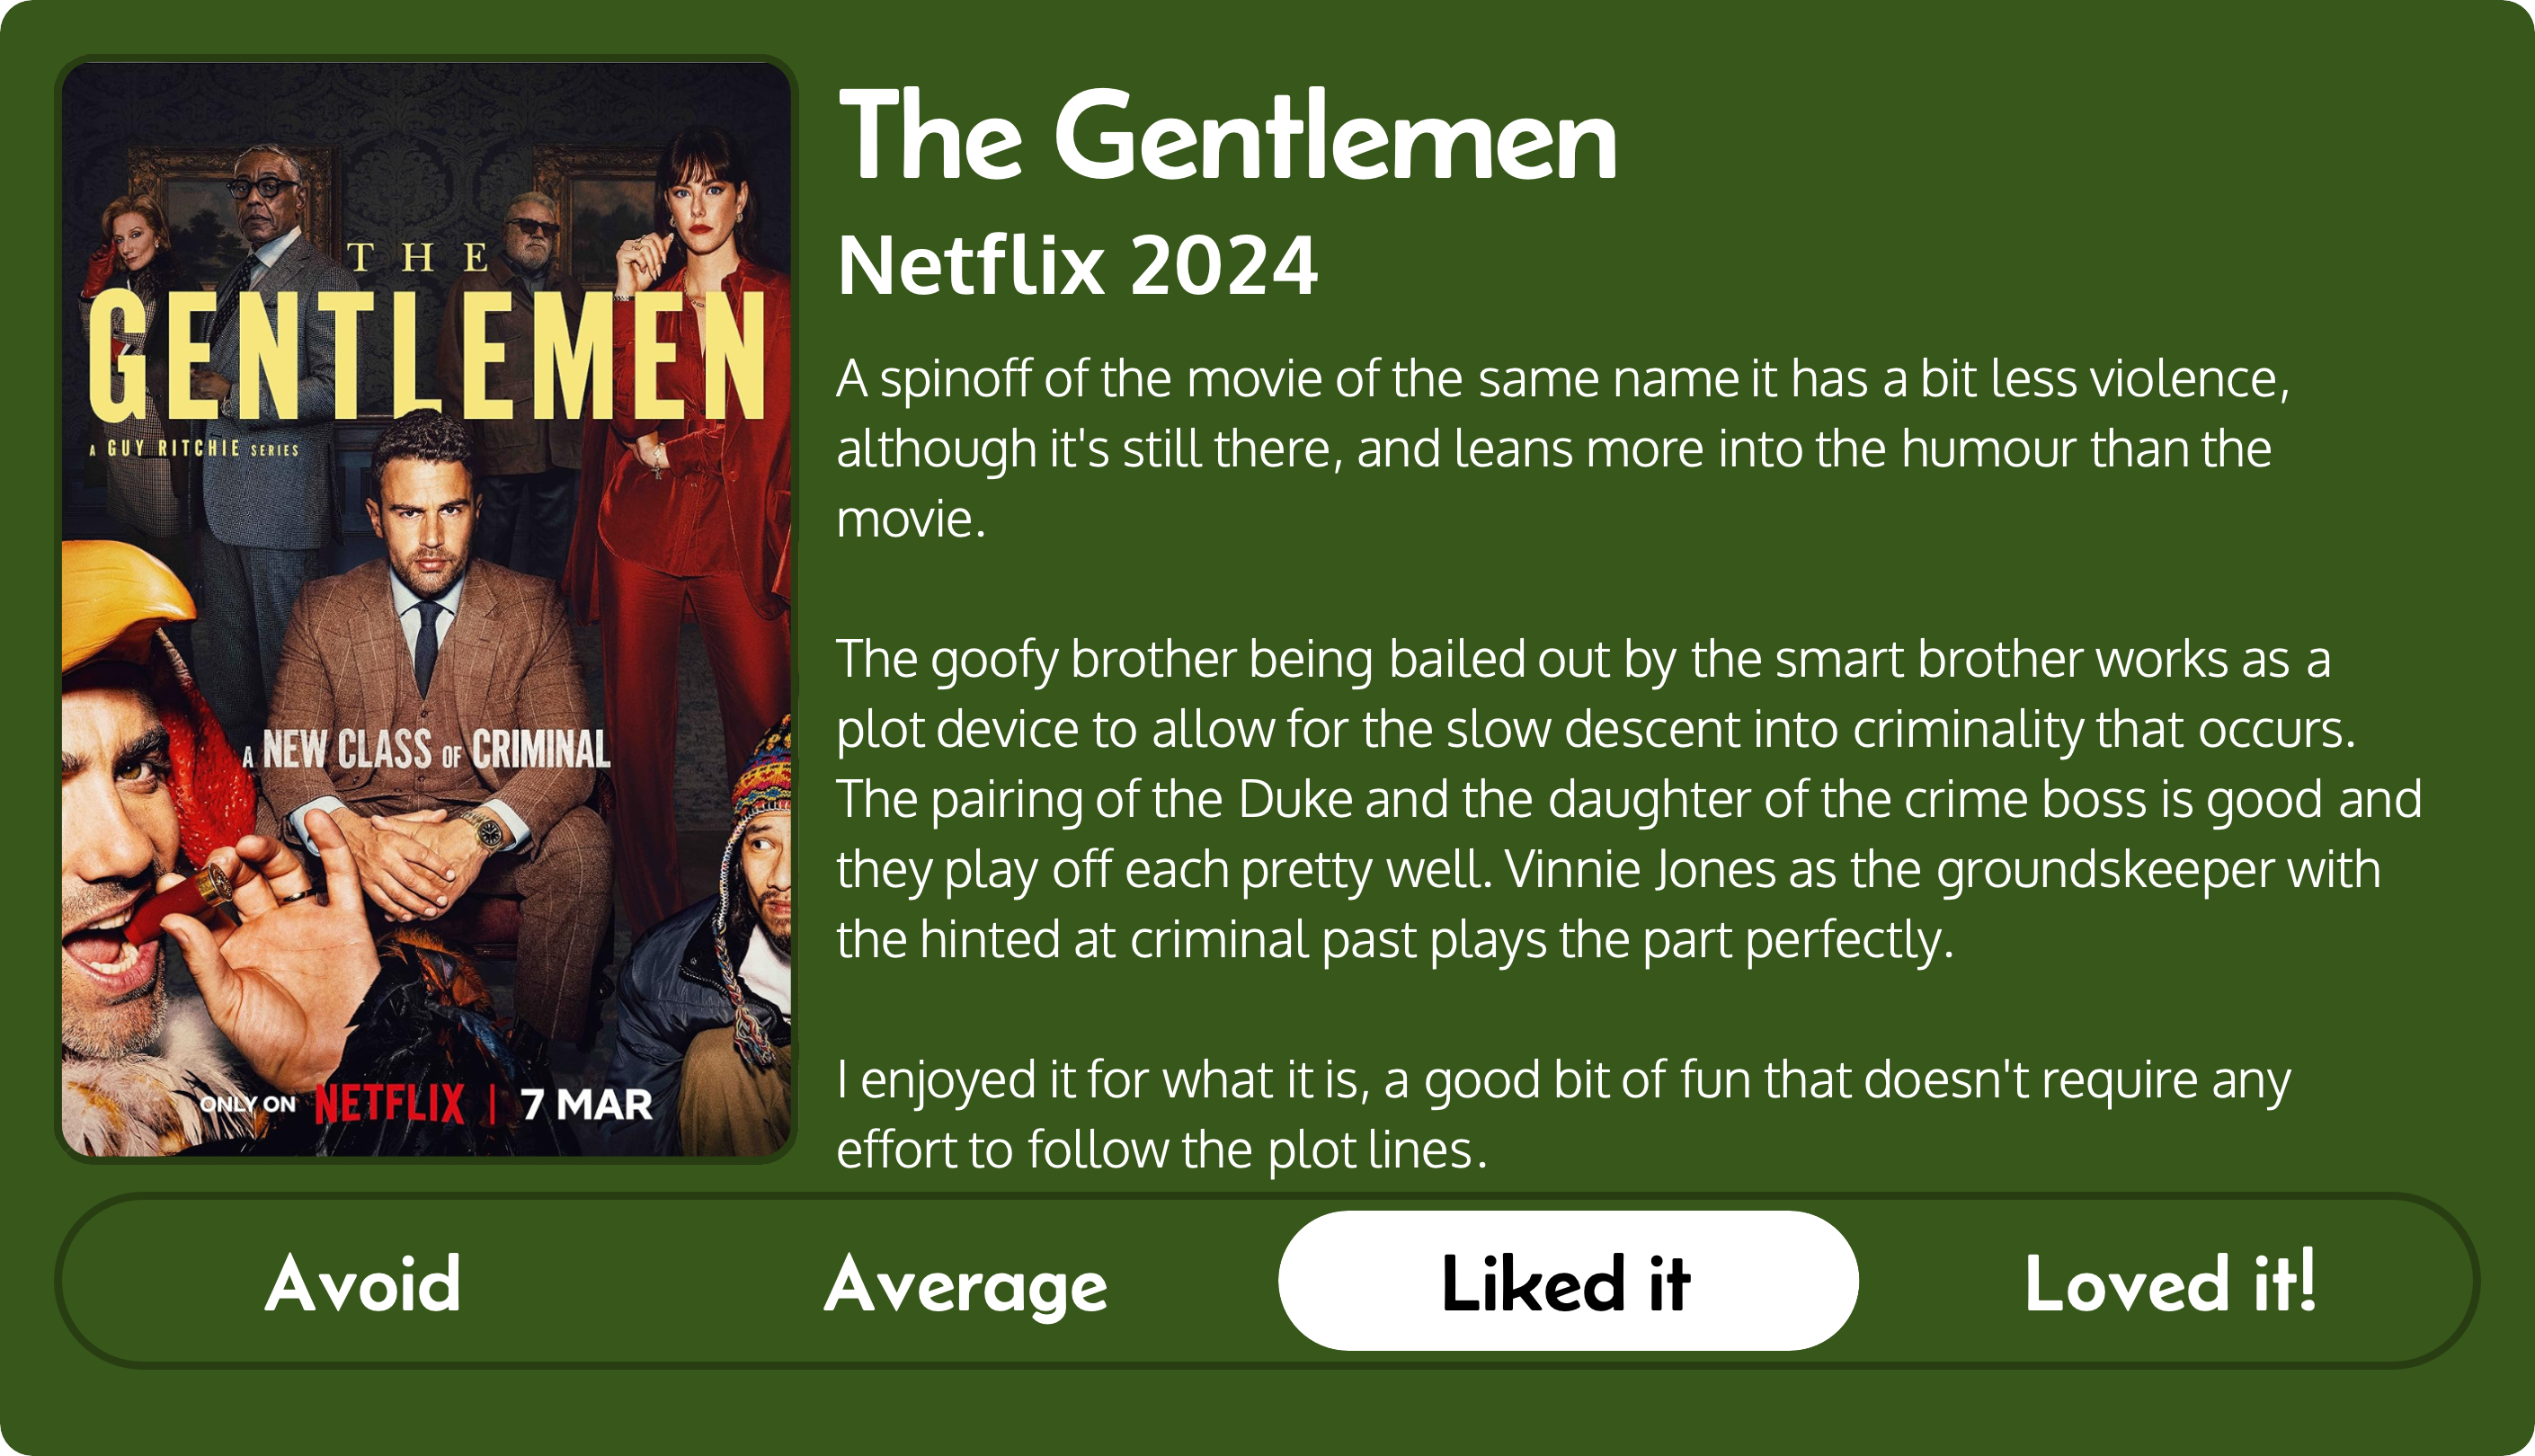 A review of the Netflix series The Gentlemen (2024). Rated “Liked it”, the review “A spinoff of the movie of the same name it has a bit less violence, although it's still there, and leans more into the humour than the movie. The goofy brother being bailed out by the smart brother works as a plot device to allow for the slow descent into criminality that occurs. The pairing of the Duke and the daughter of the crime boss is good and they play off each pretty well. Vinnie Jones as the groundskeeper with the hinted at criminal past plays the part perfectly. I enjoyed it for what it is, a good bit of fun that doesn't require any effort to follow the plot lines.”